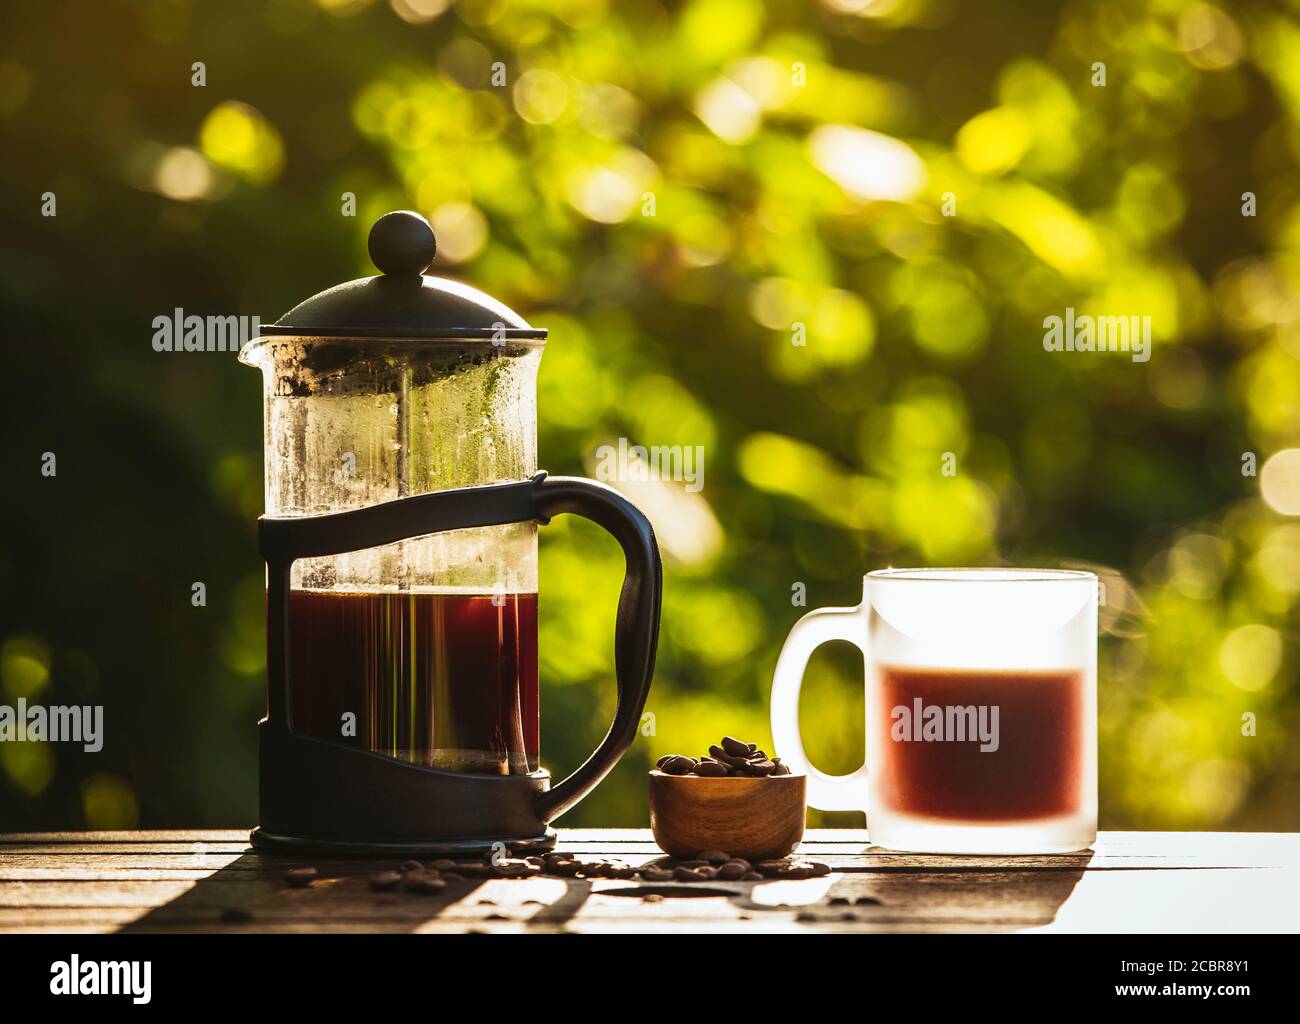 https://c8.alamy.com/comp/2CBR8Y1/french-press-coffee-and-cup-on-table-with-scattered-coffee-beans-in-garden-on-sunny-bright-morning-day-reason-to-wake-up-concept-bokeh-green-2CBR8Y1.jpg